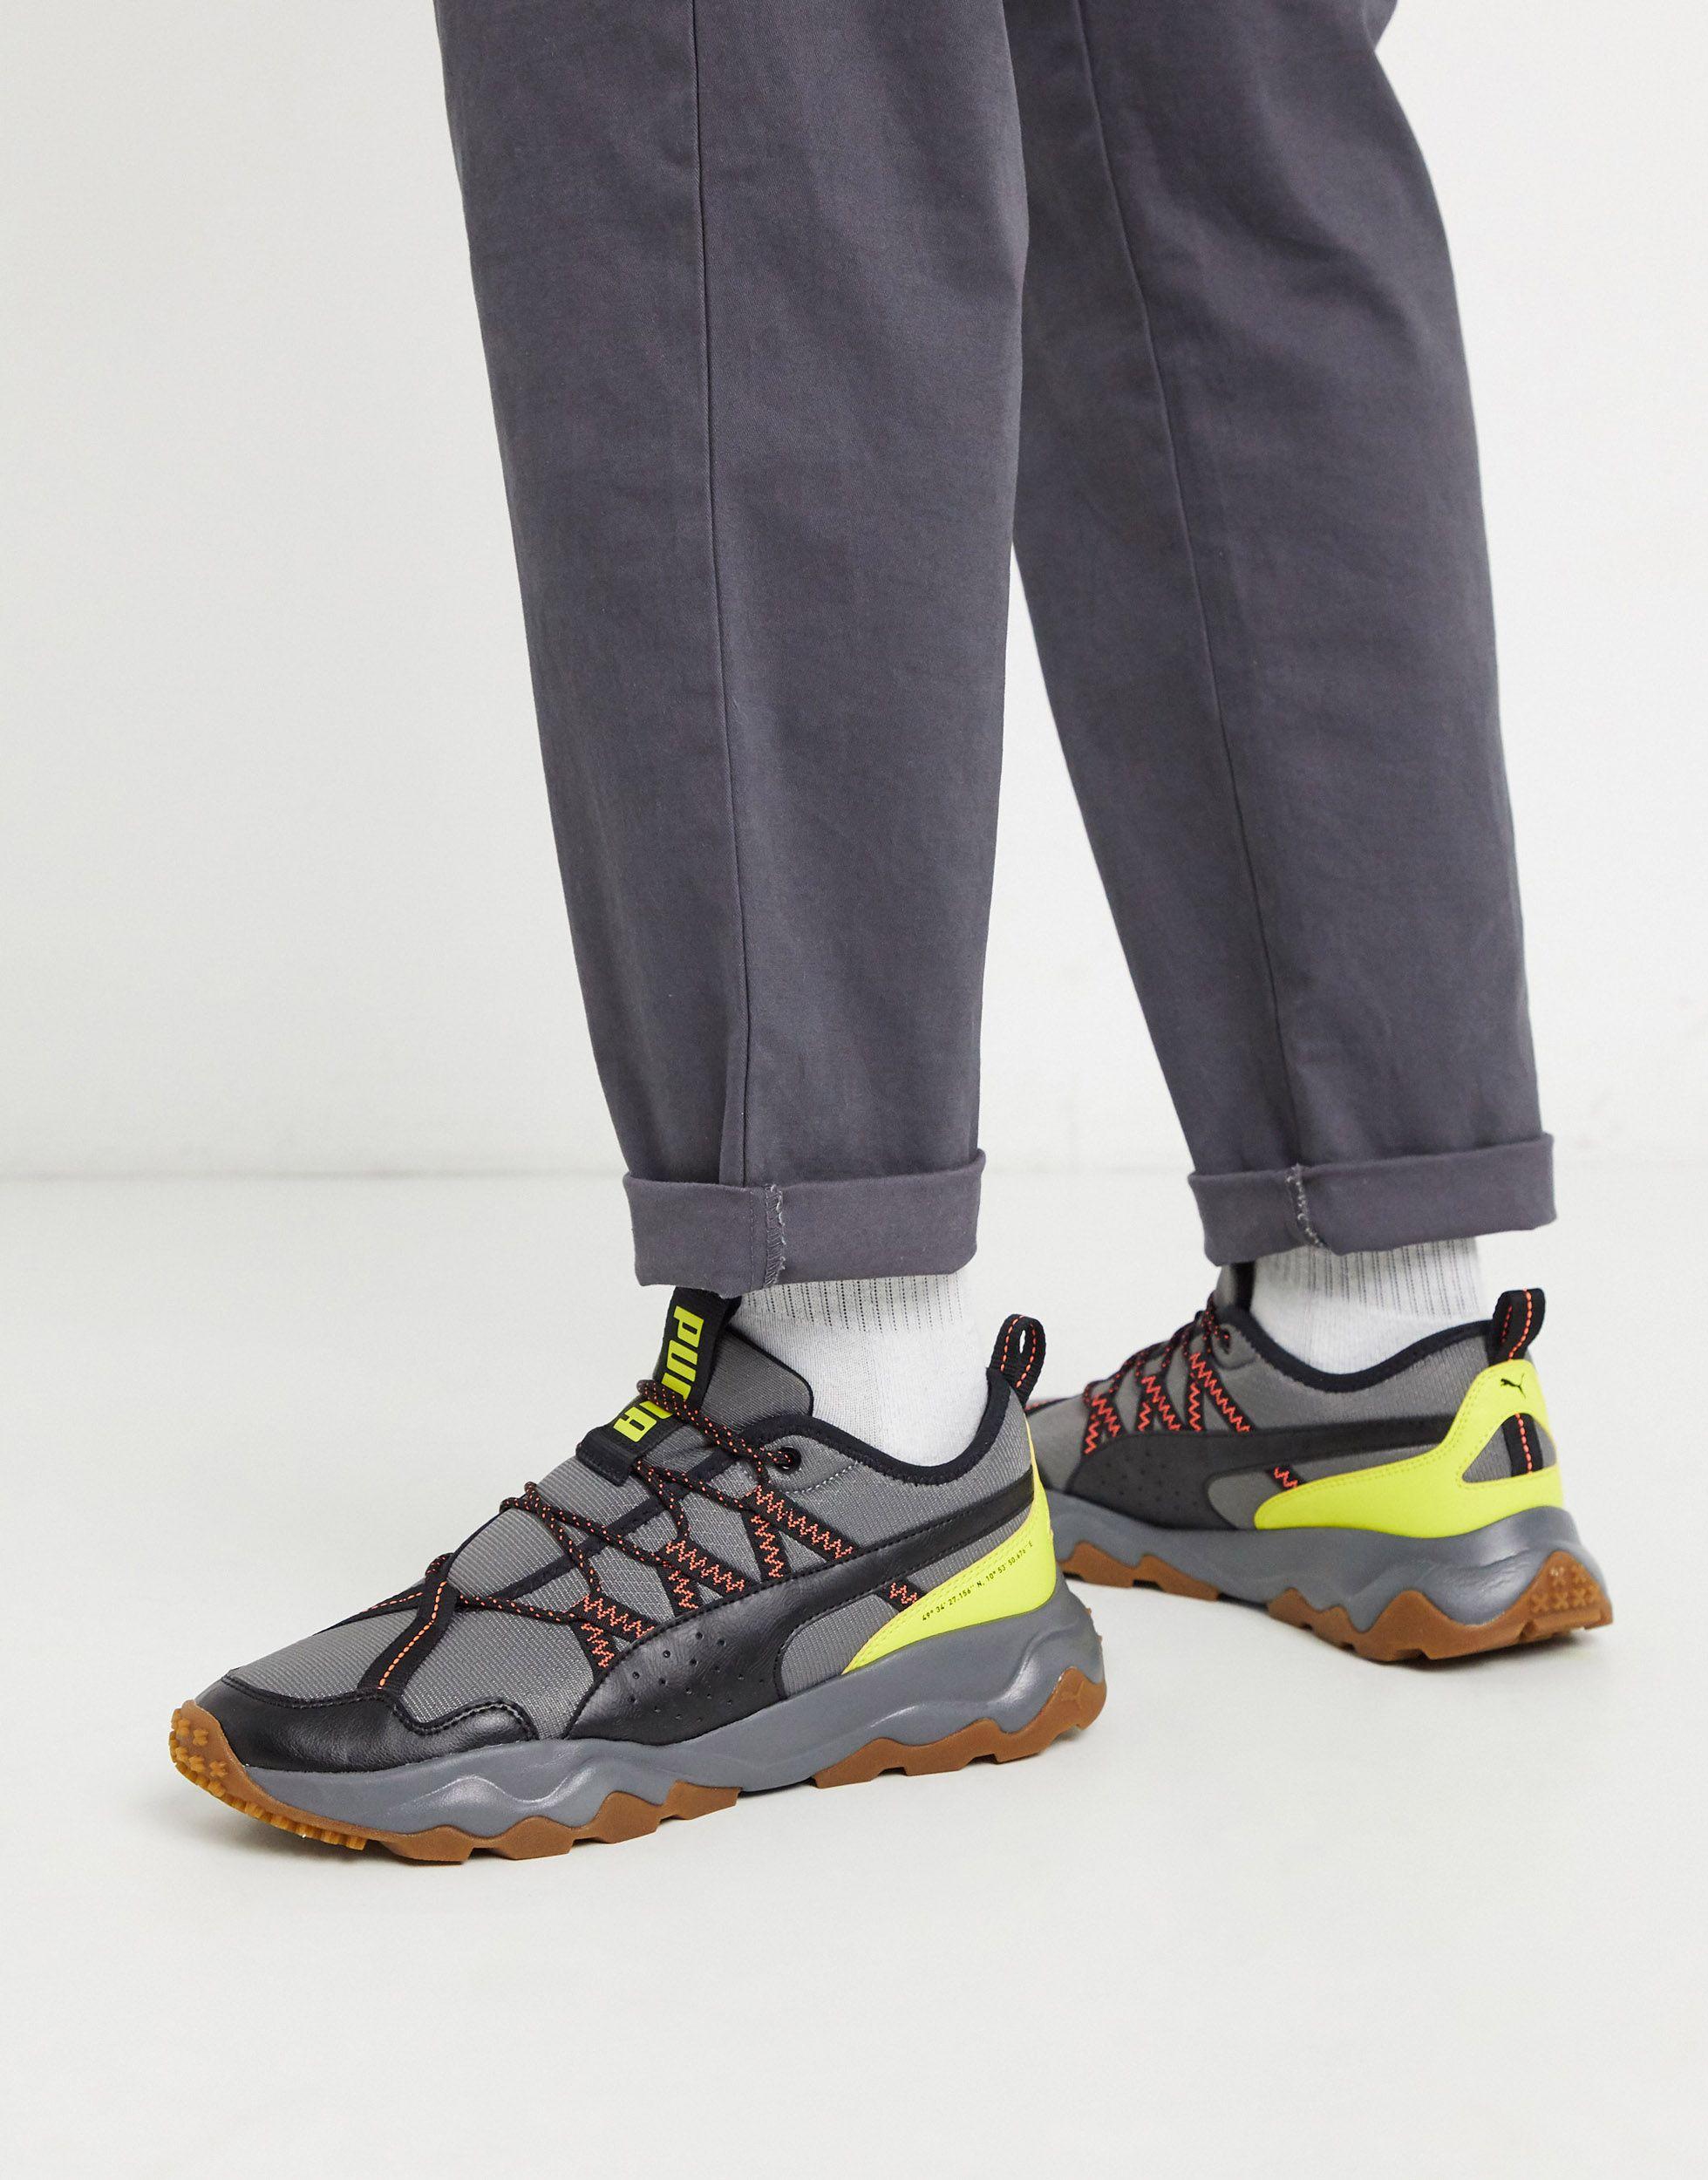 PUMA Rubber Ember Trail Running Shoes in Gray for Men - Lyst